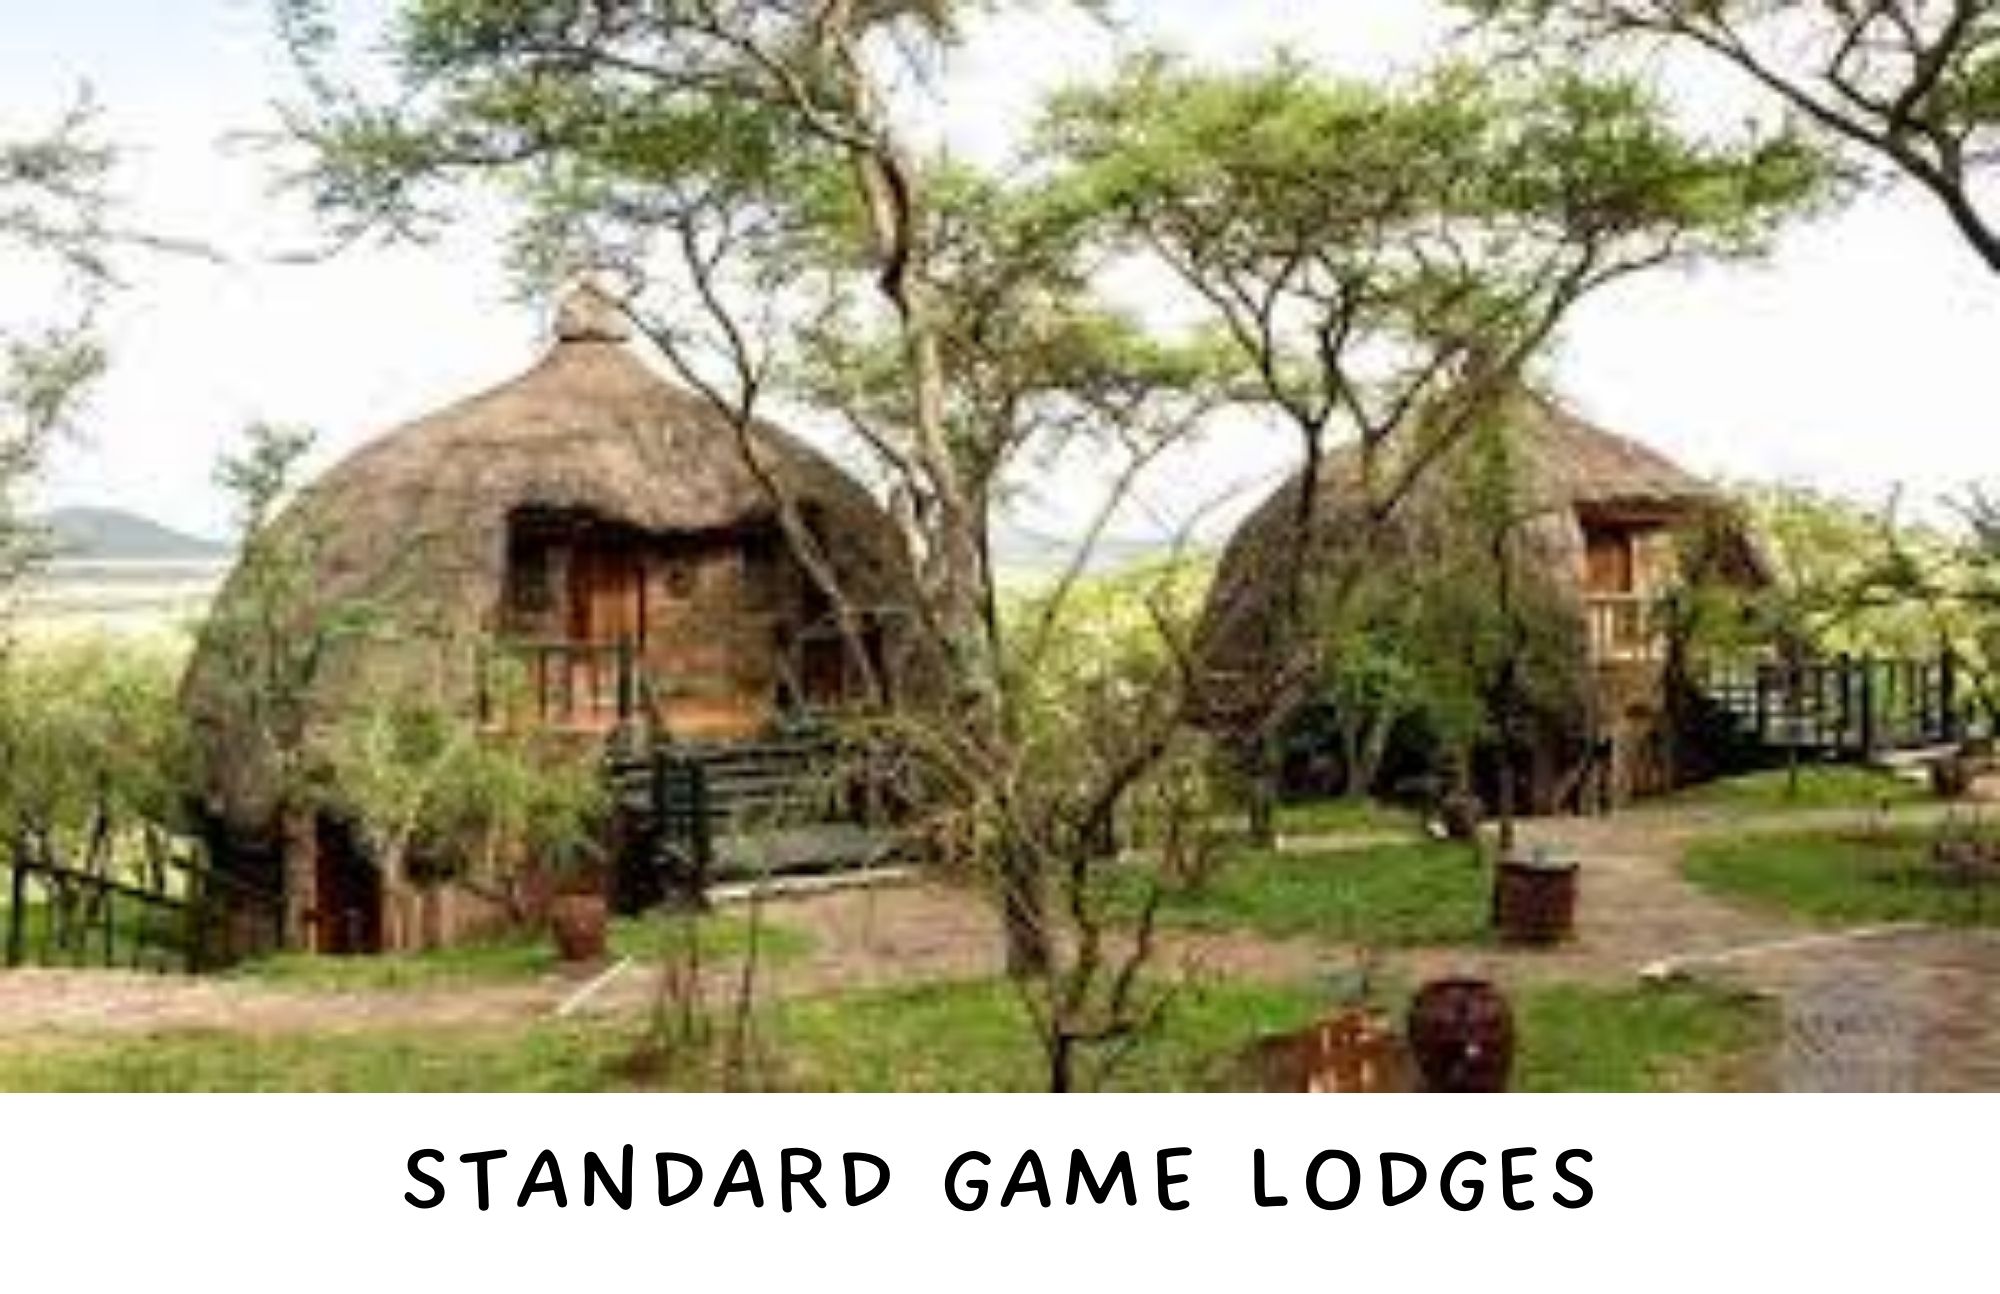 There are two standard nipa hut lodges with trees and grasses outside